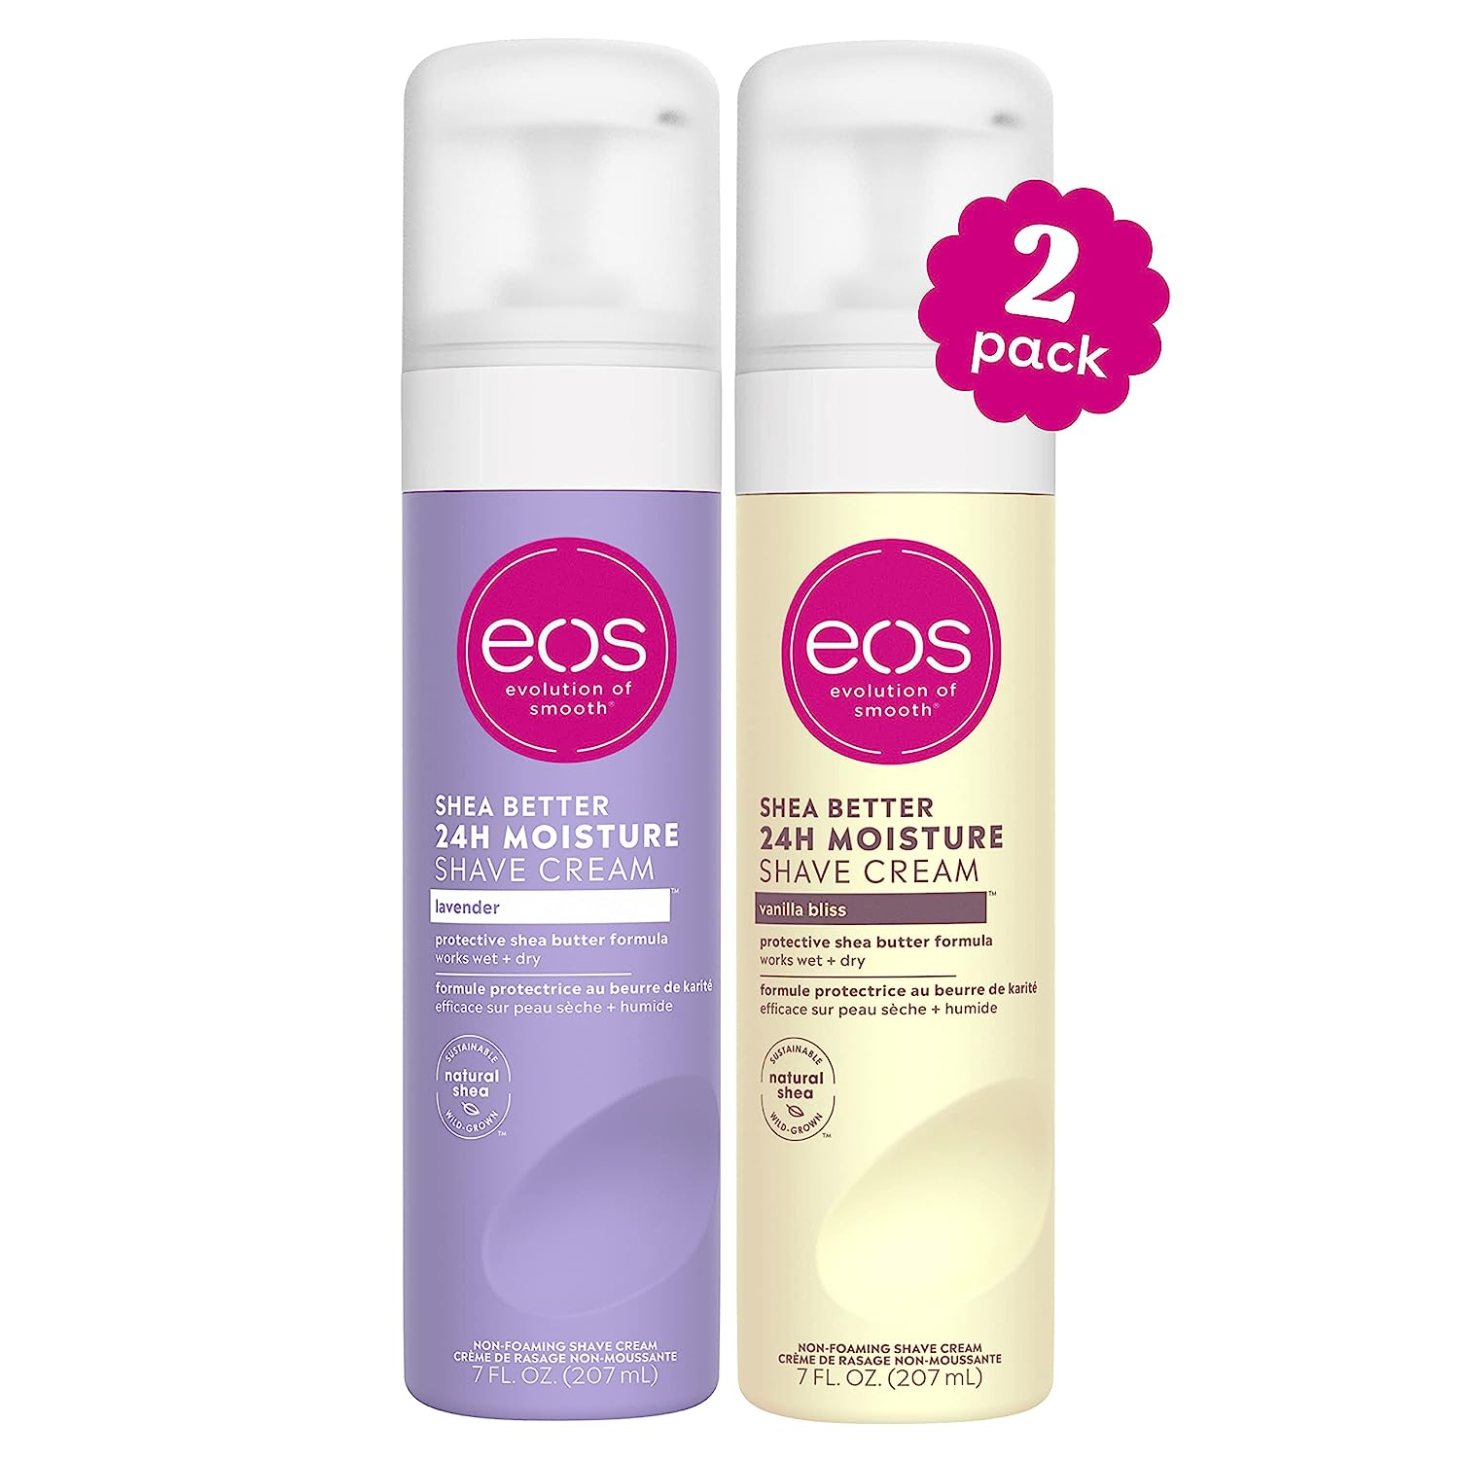 Two bottles of eos shea butter shaving cream on sale for prime big deal days